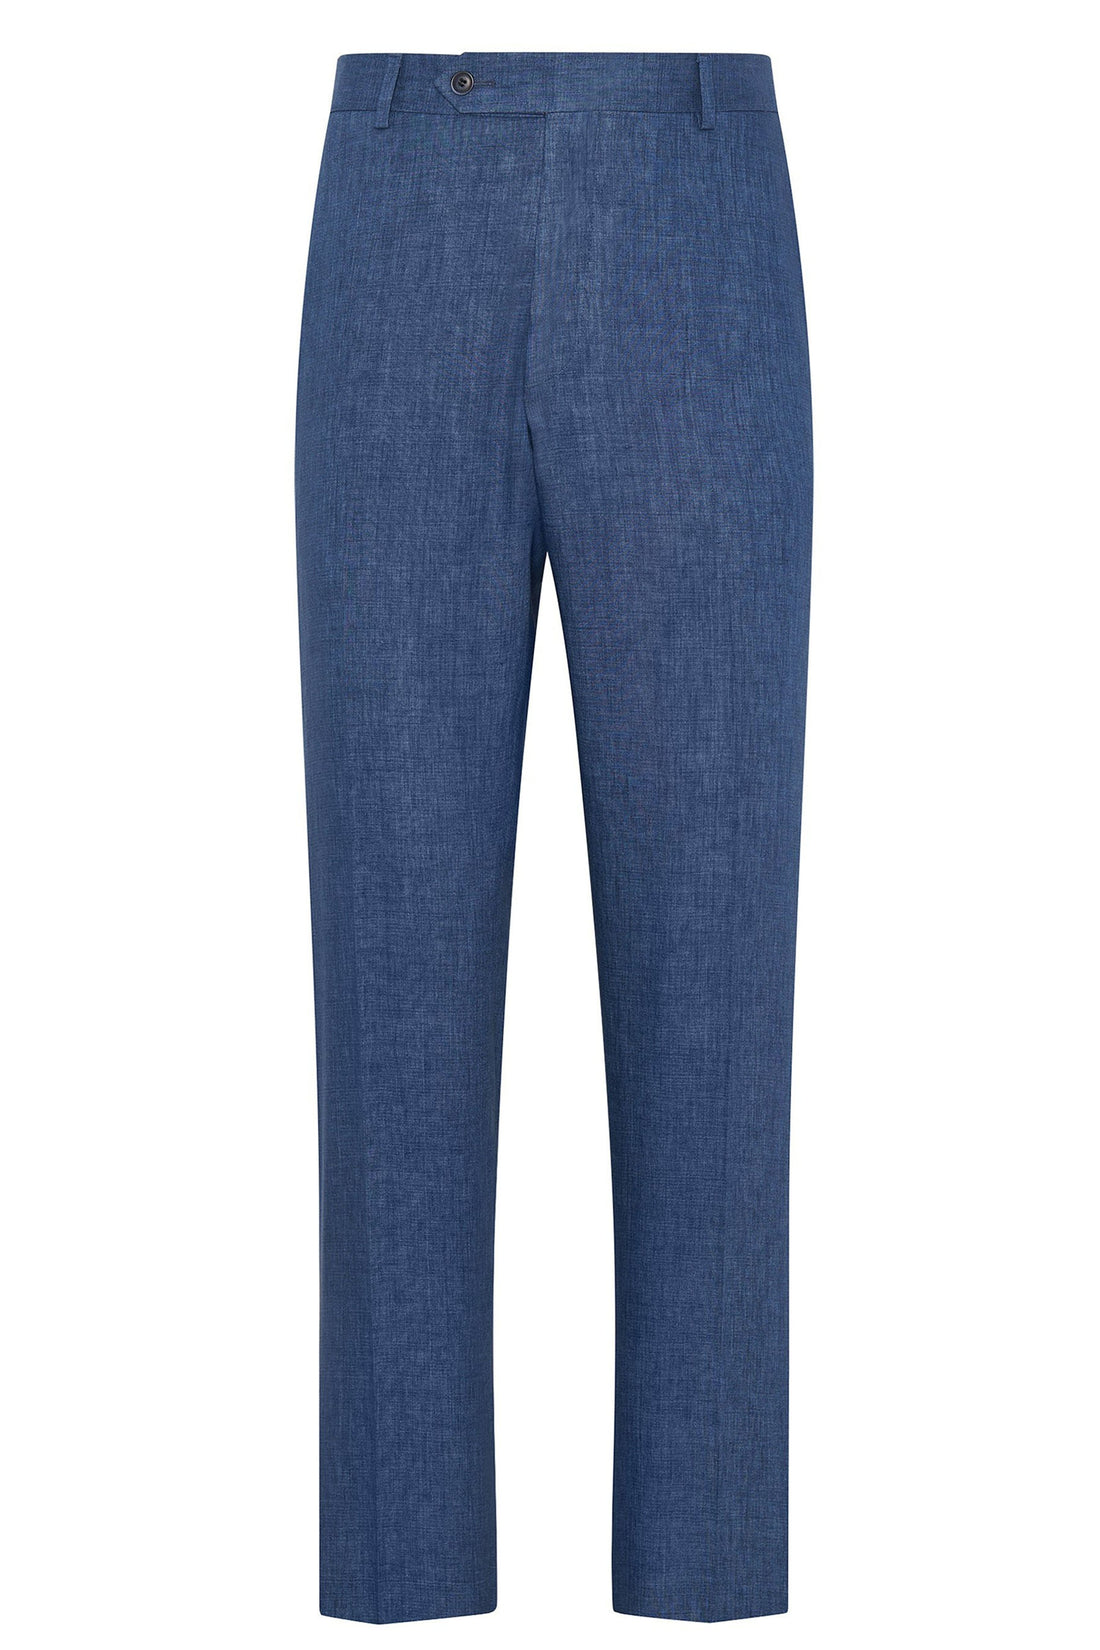 Blue Washed Linen Flat Front Trousers